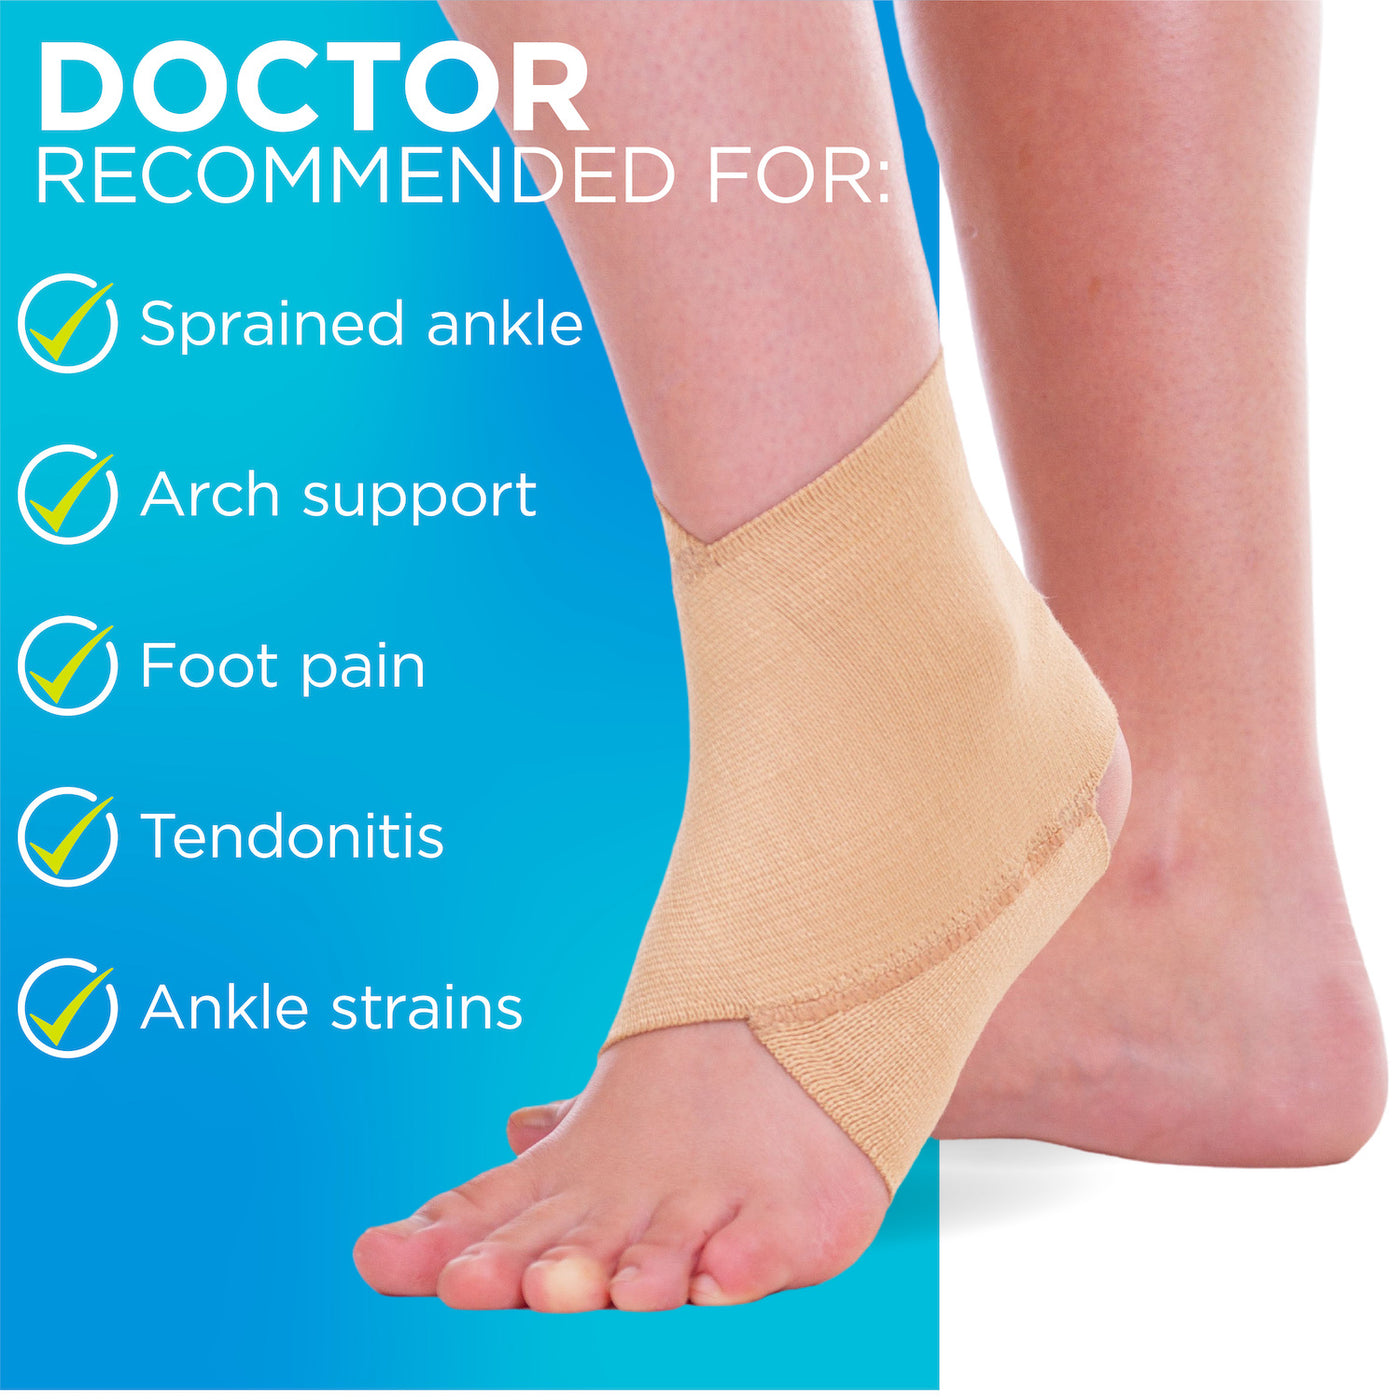 The BraceAbility compression bandage for sprained ankle also has arch support, reducing tendonitis pain